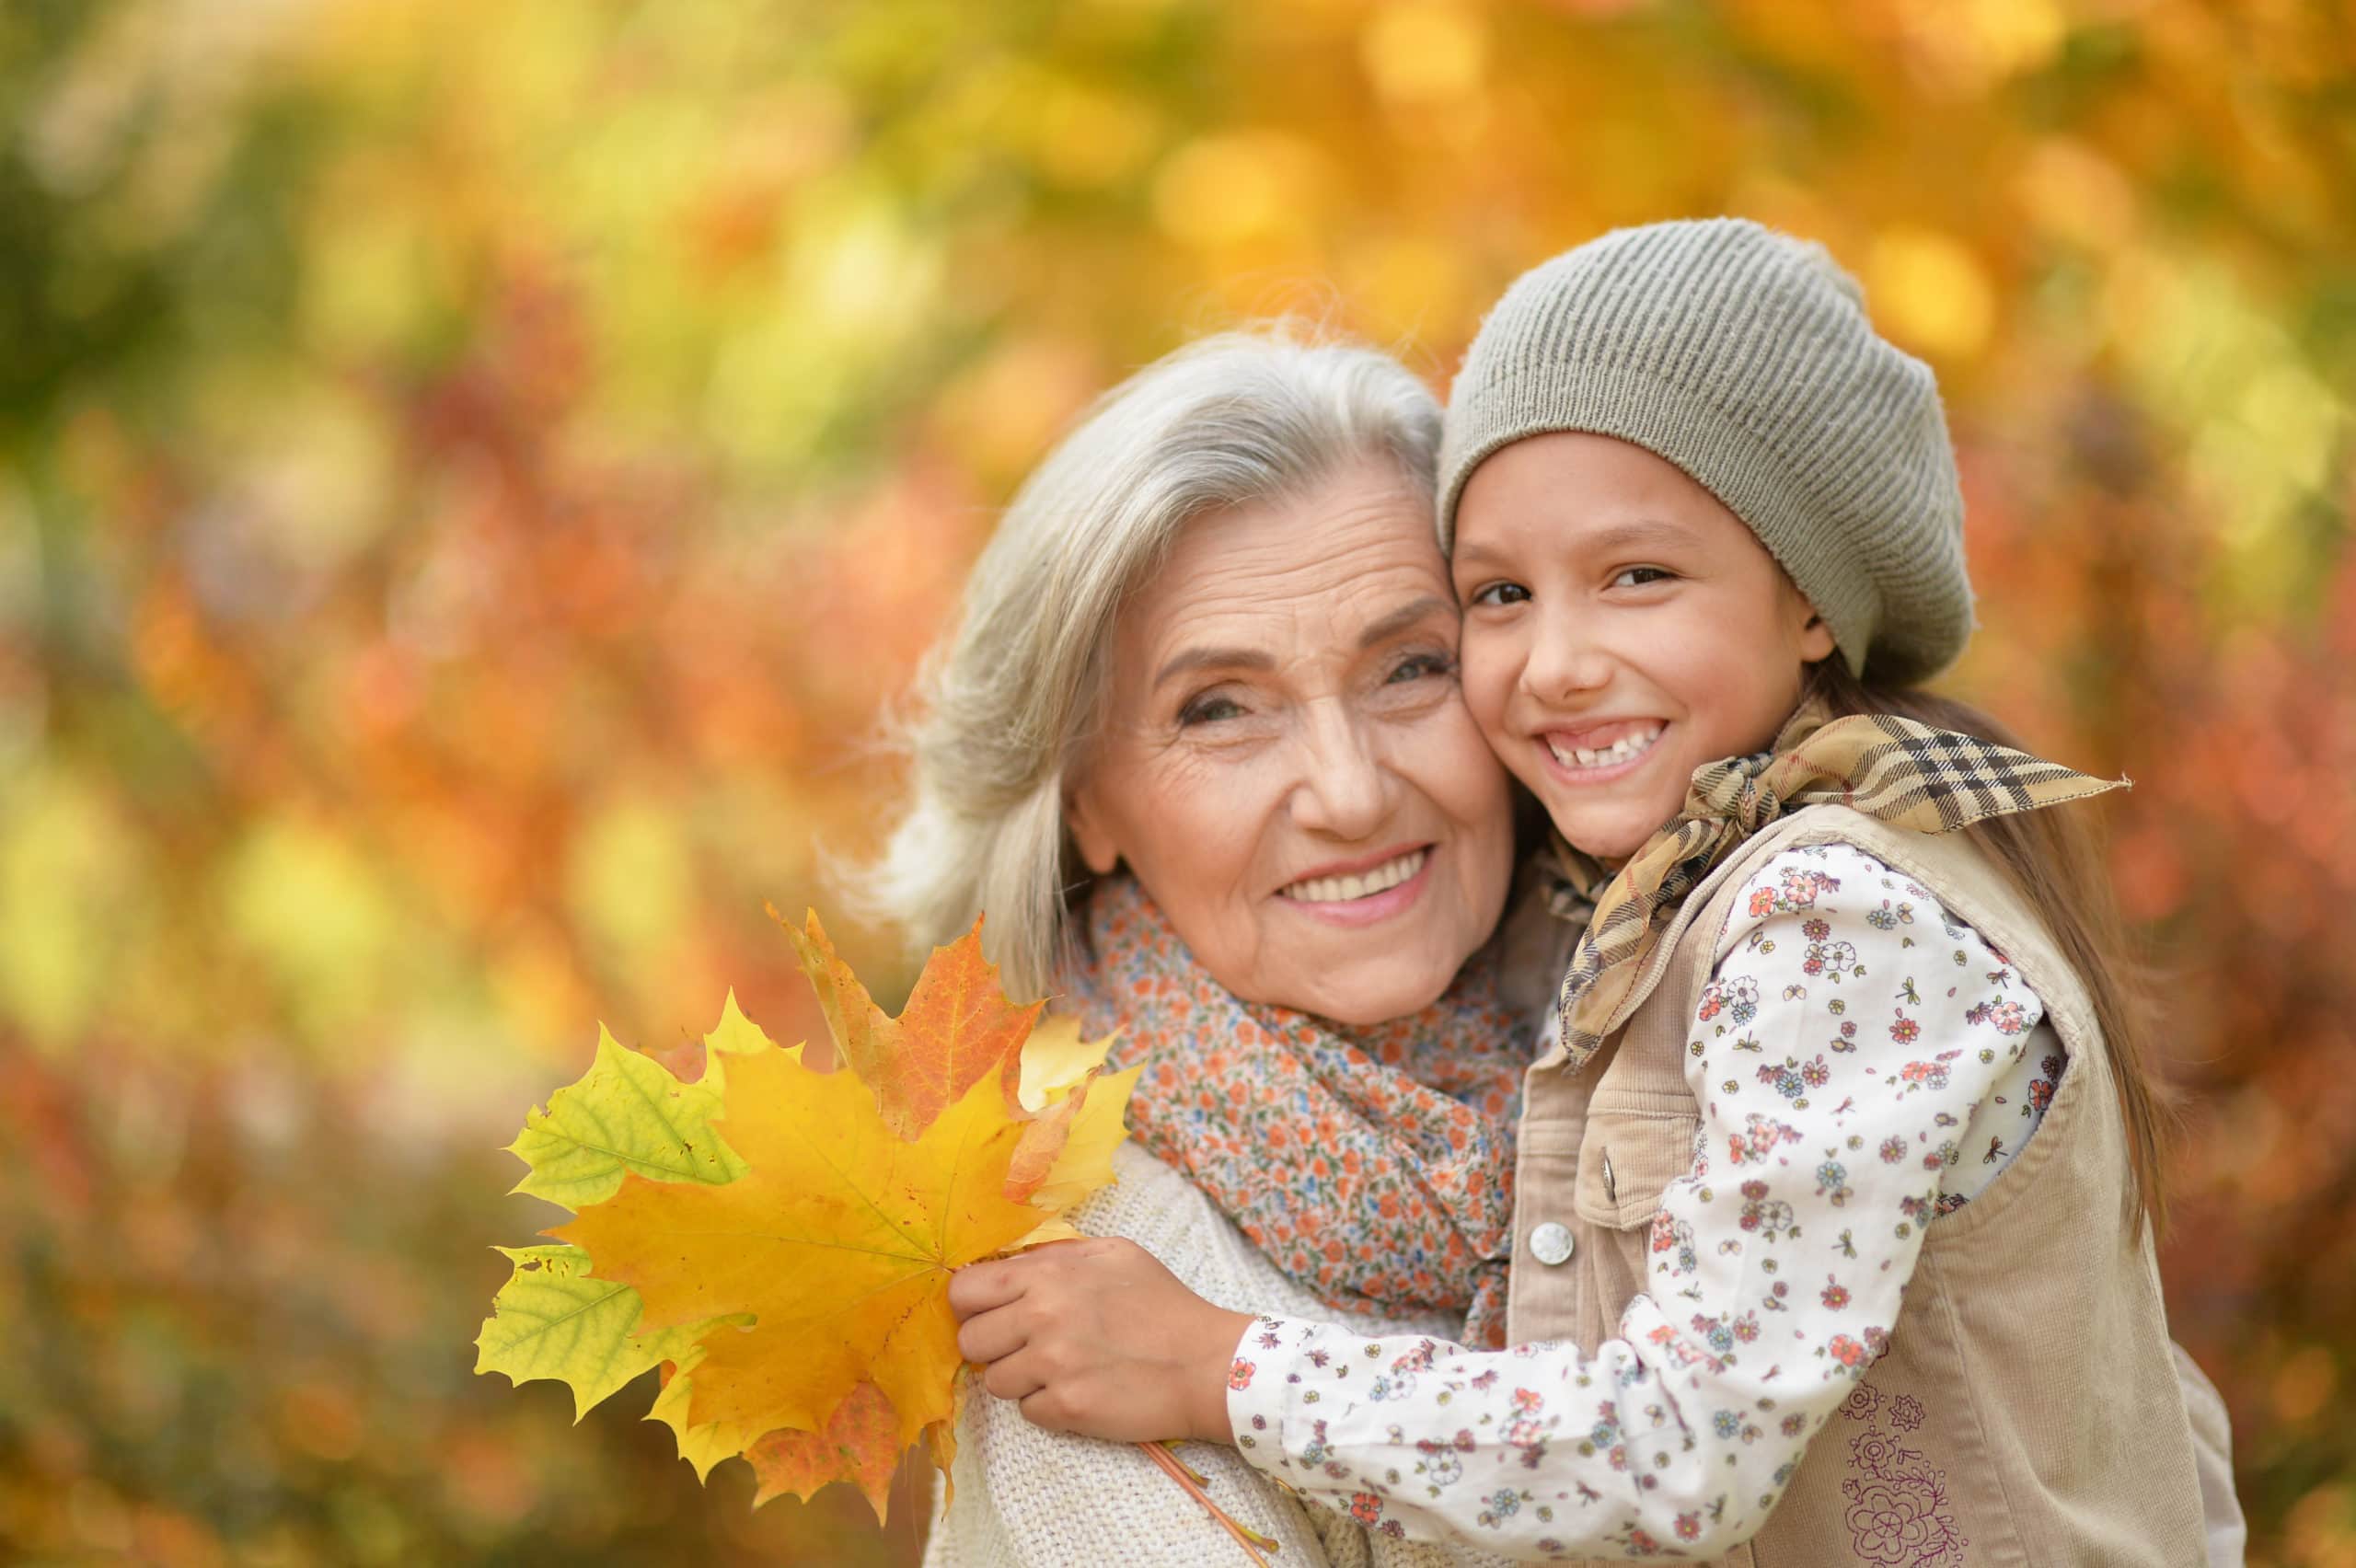 grandmother with granddaughter smiling holding autumn leaves